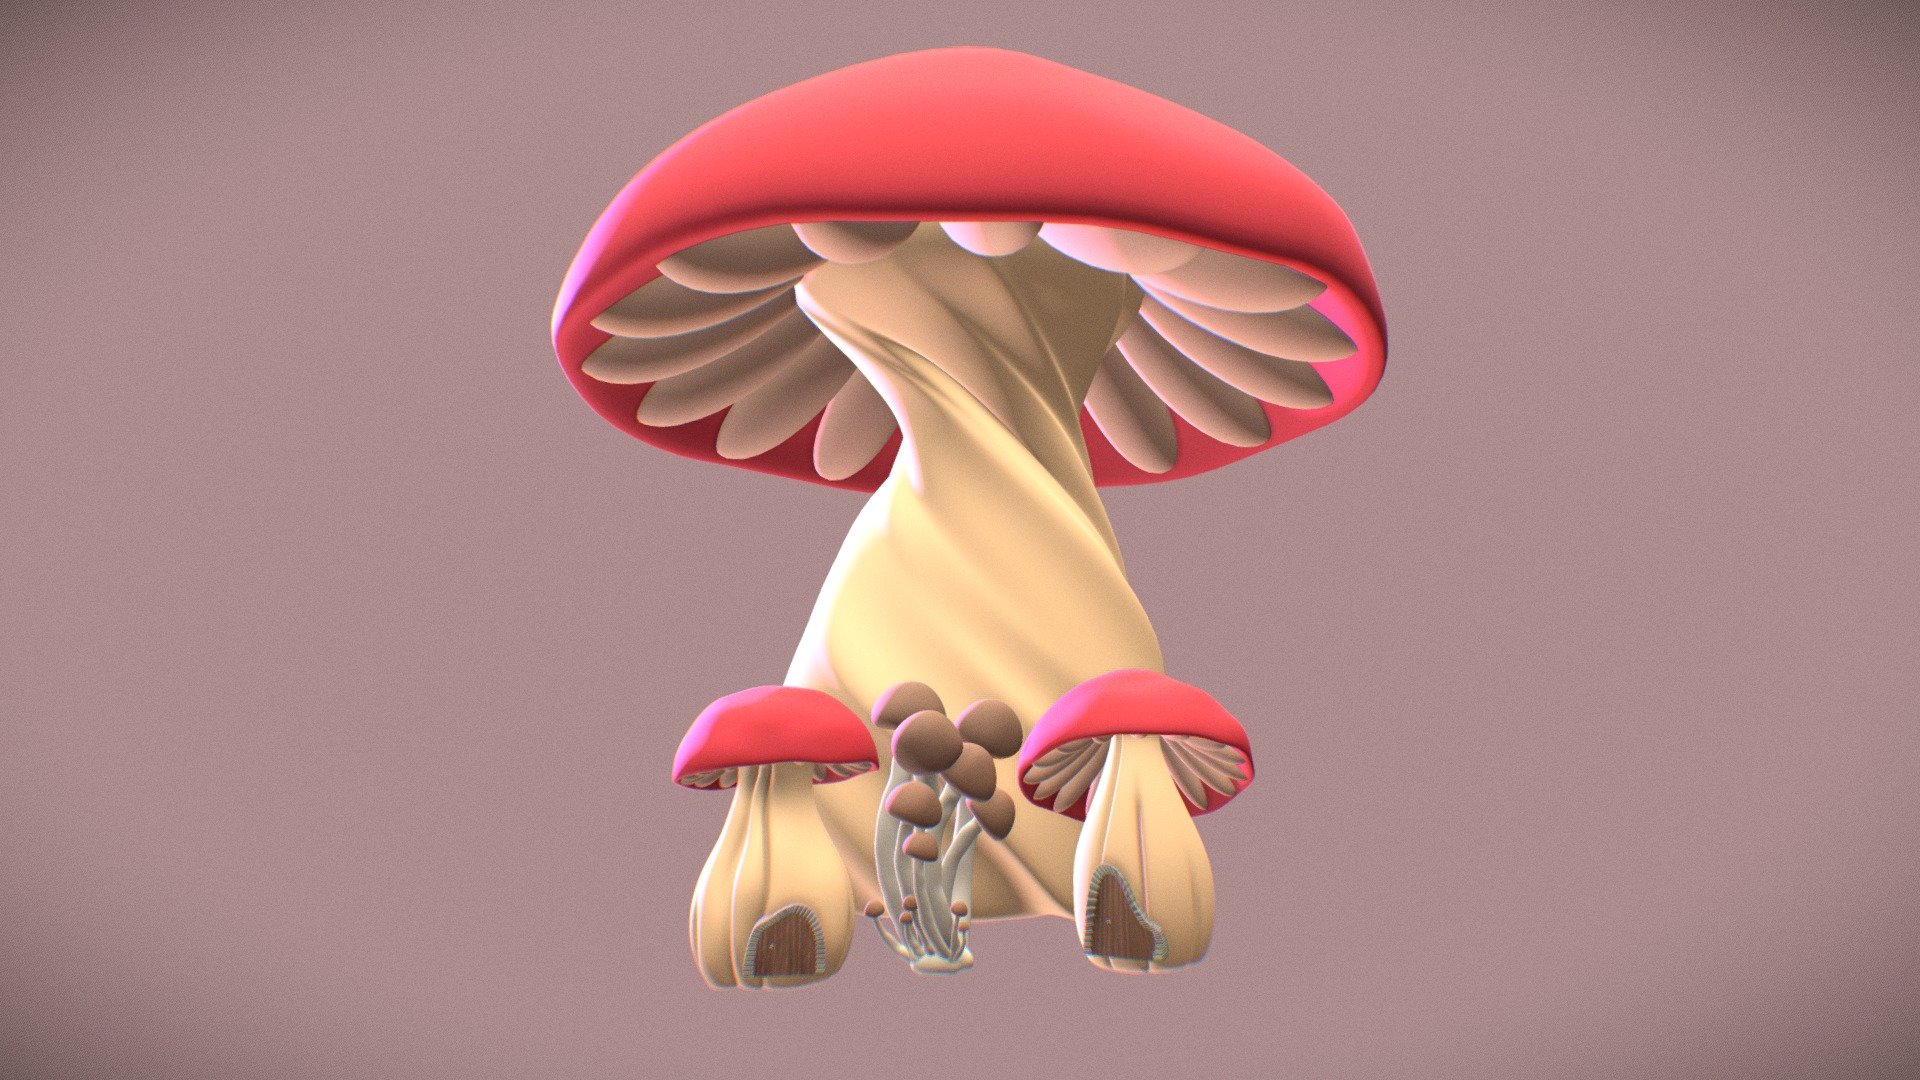 General Info
A set of 2 simple mushy houses, 1 destorted mushy and 1 shimeji asset

All parts and meshes are separated.

UV
Mushroom body UVs are not unwraped 3d model